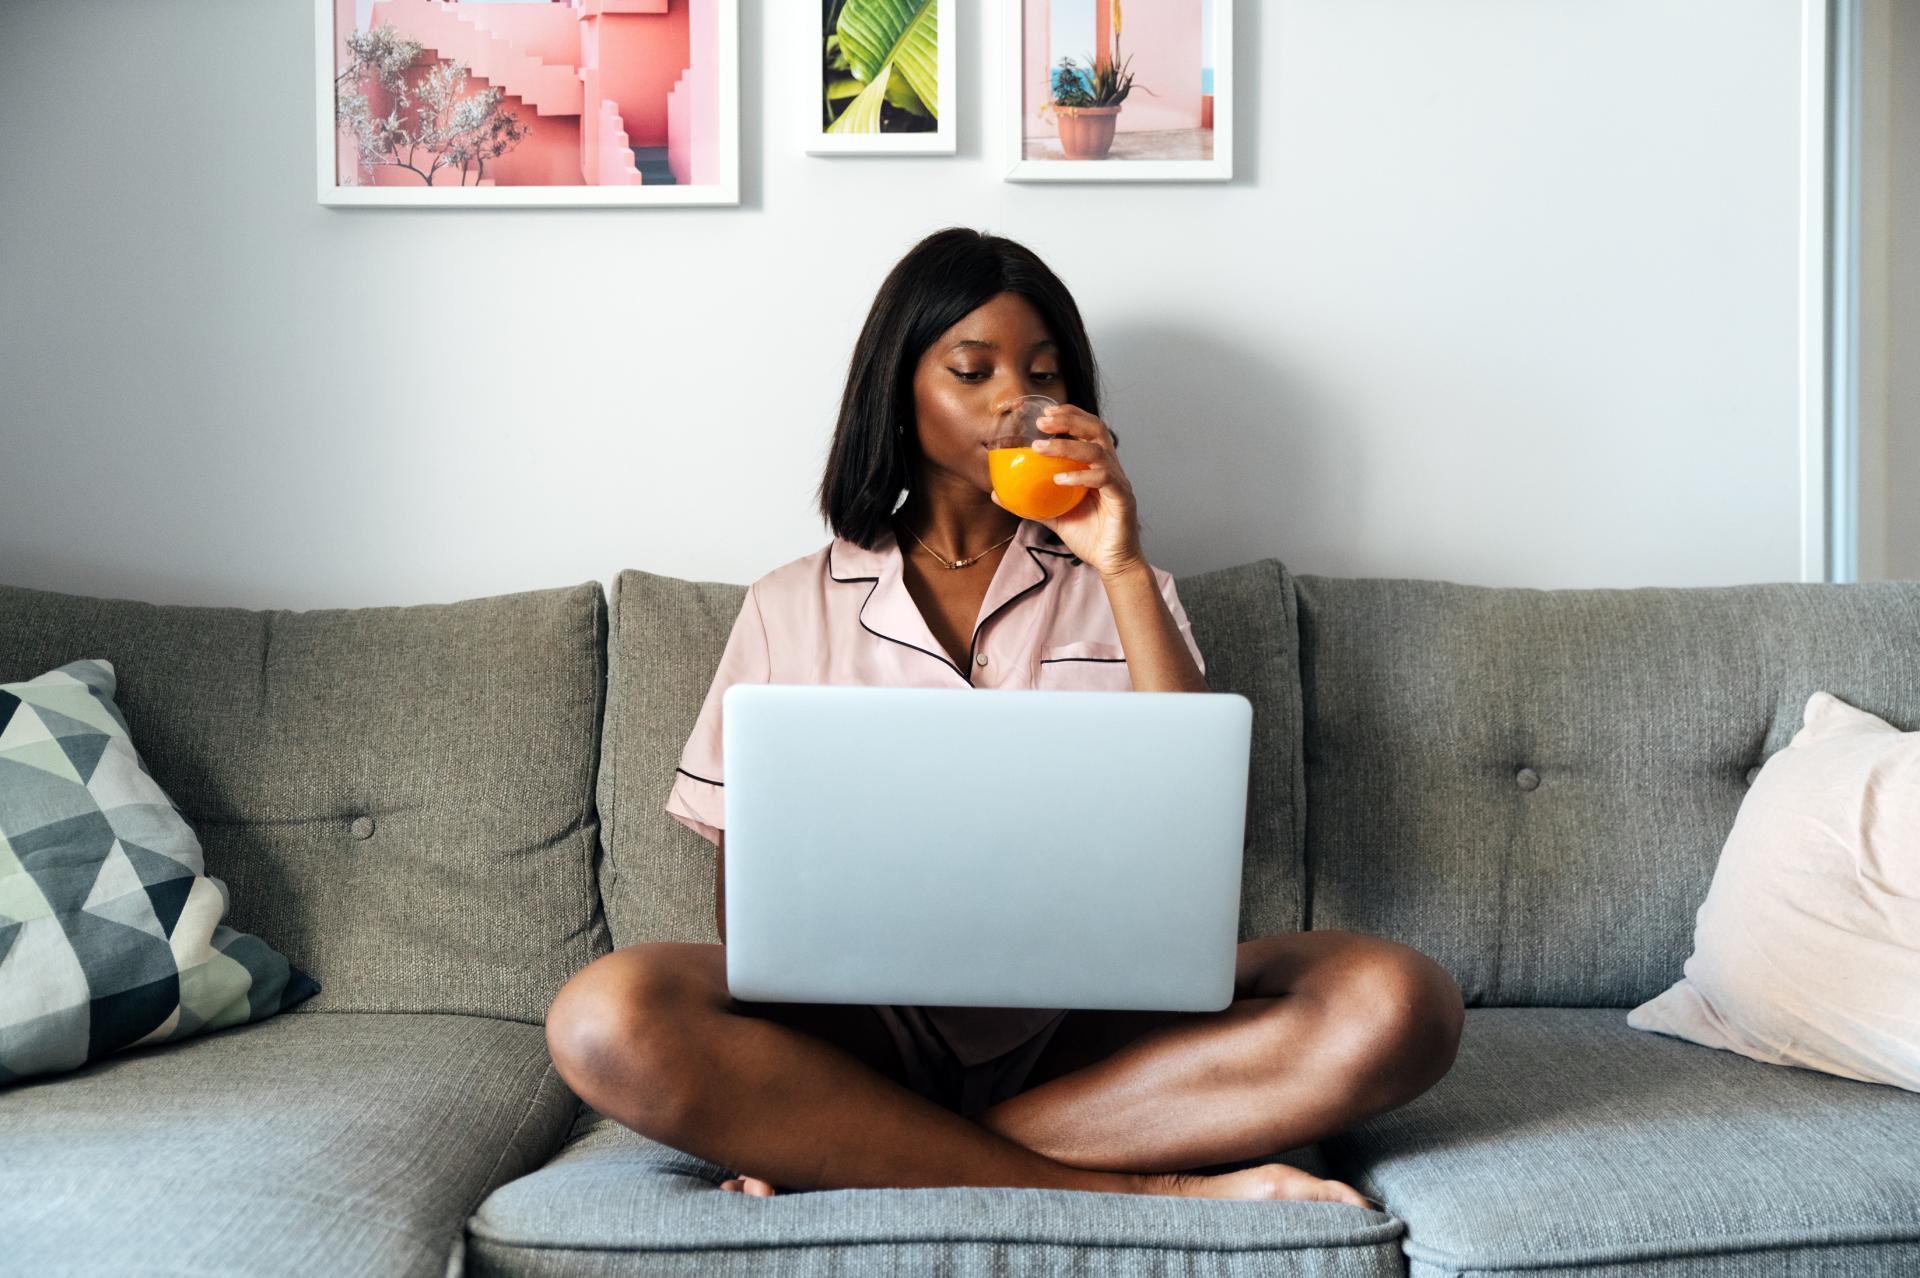 A Black woman in pajamas sitting cross-legged on the couch drinking orange juice as she looks at her laptop